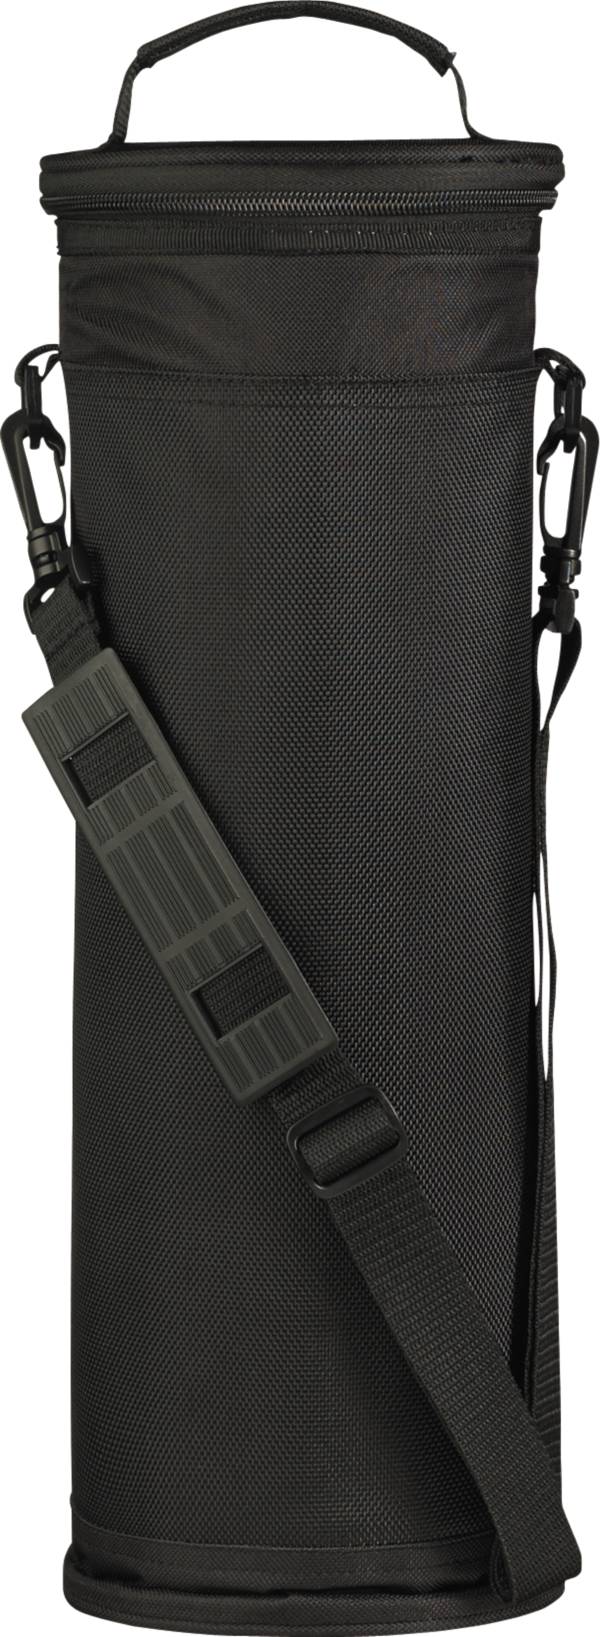 Maxfli 6-Can Cooler Bag product image